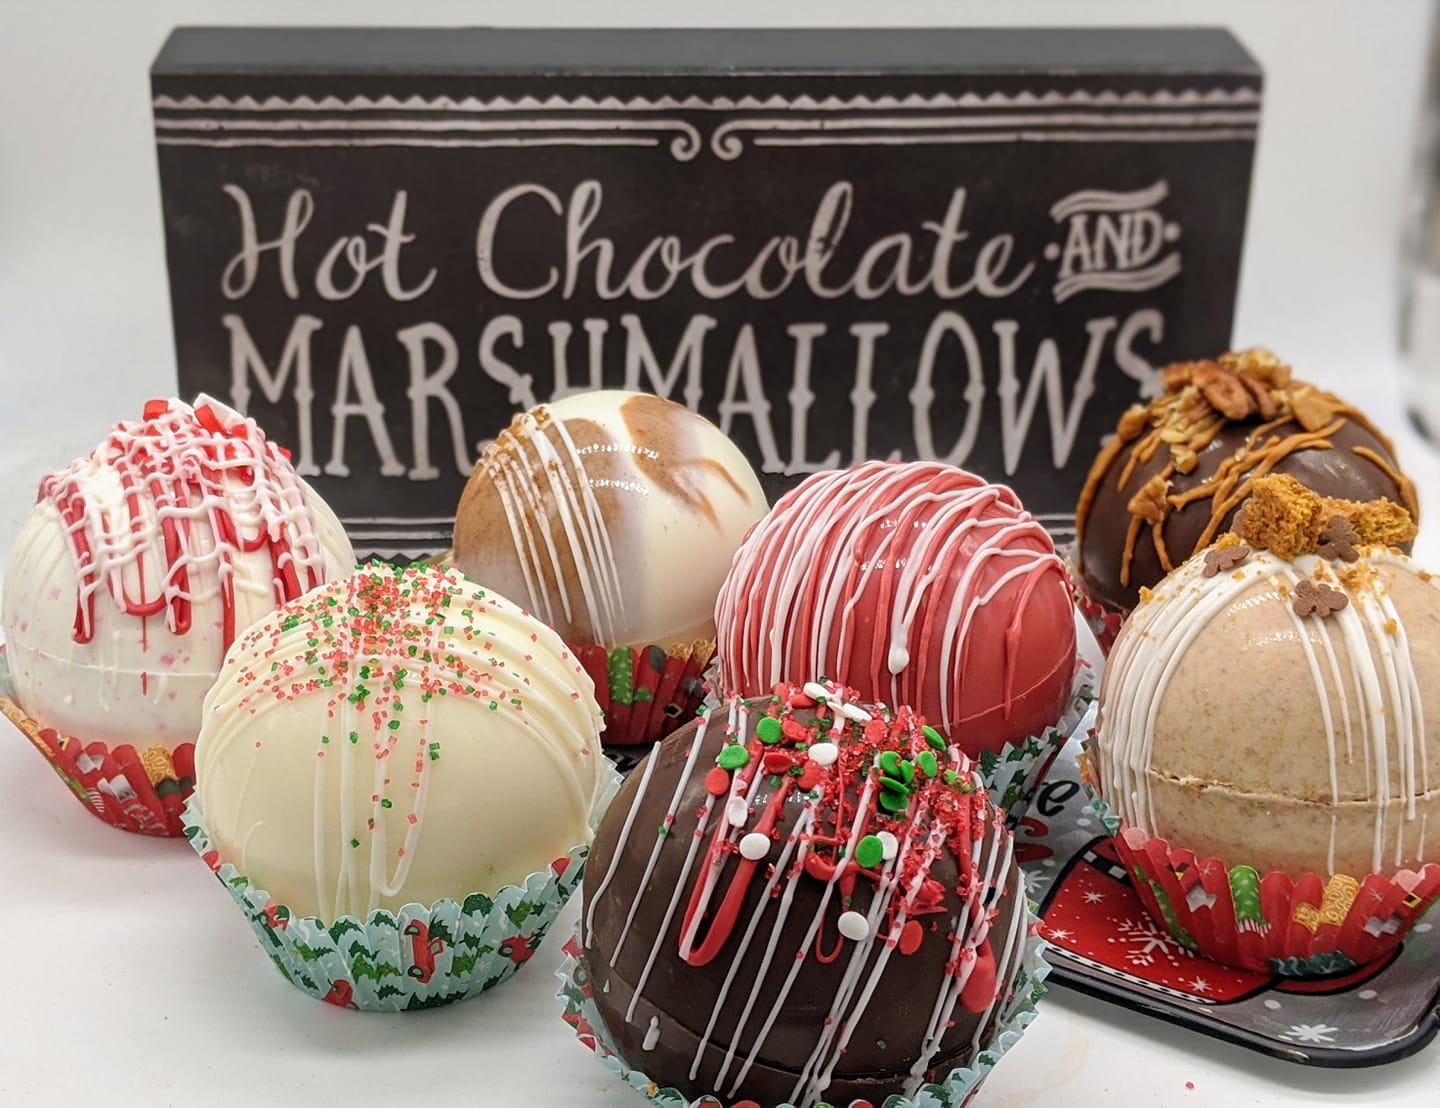 Hot Cocoa Chocolate Bomb Flavors To Make 